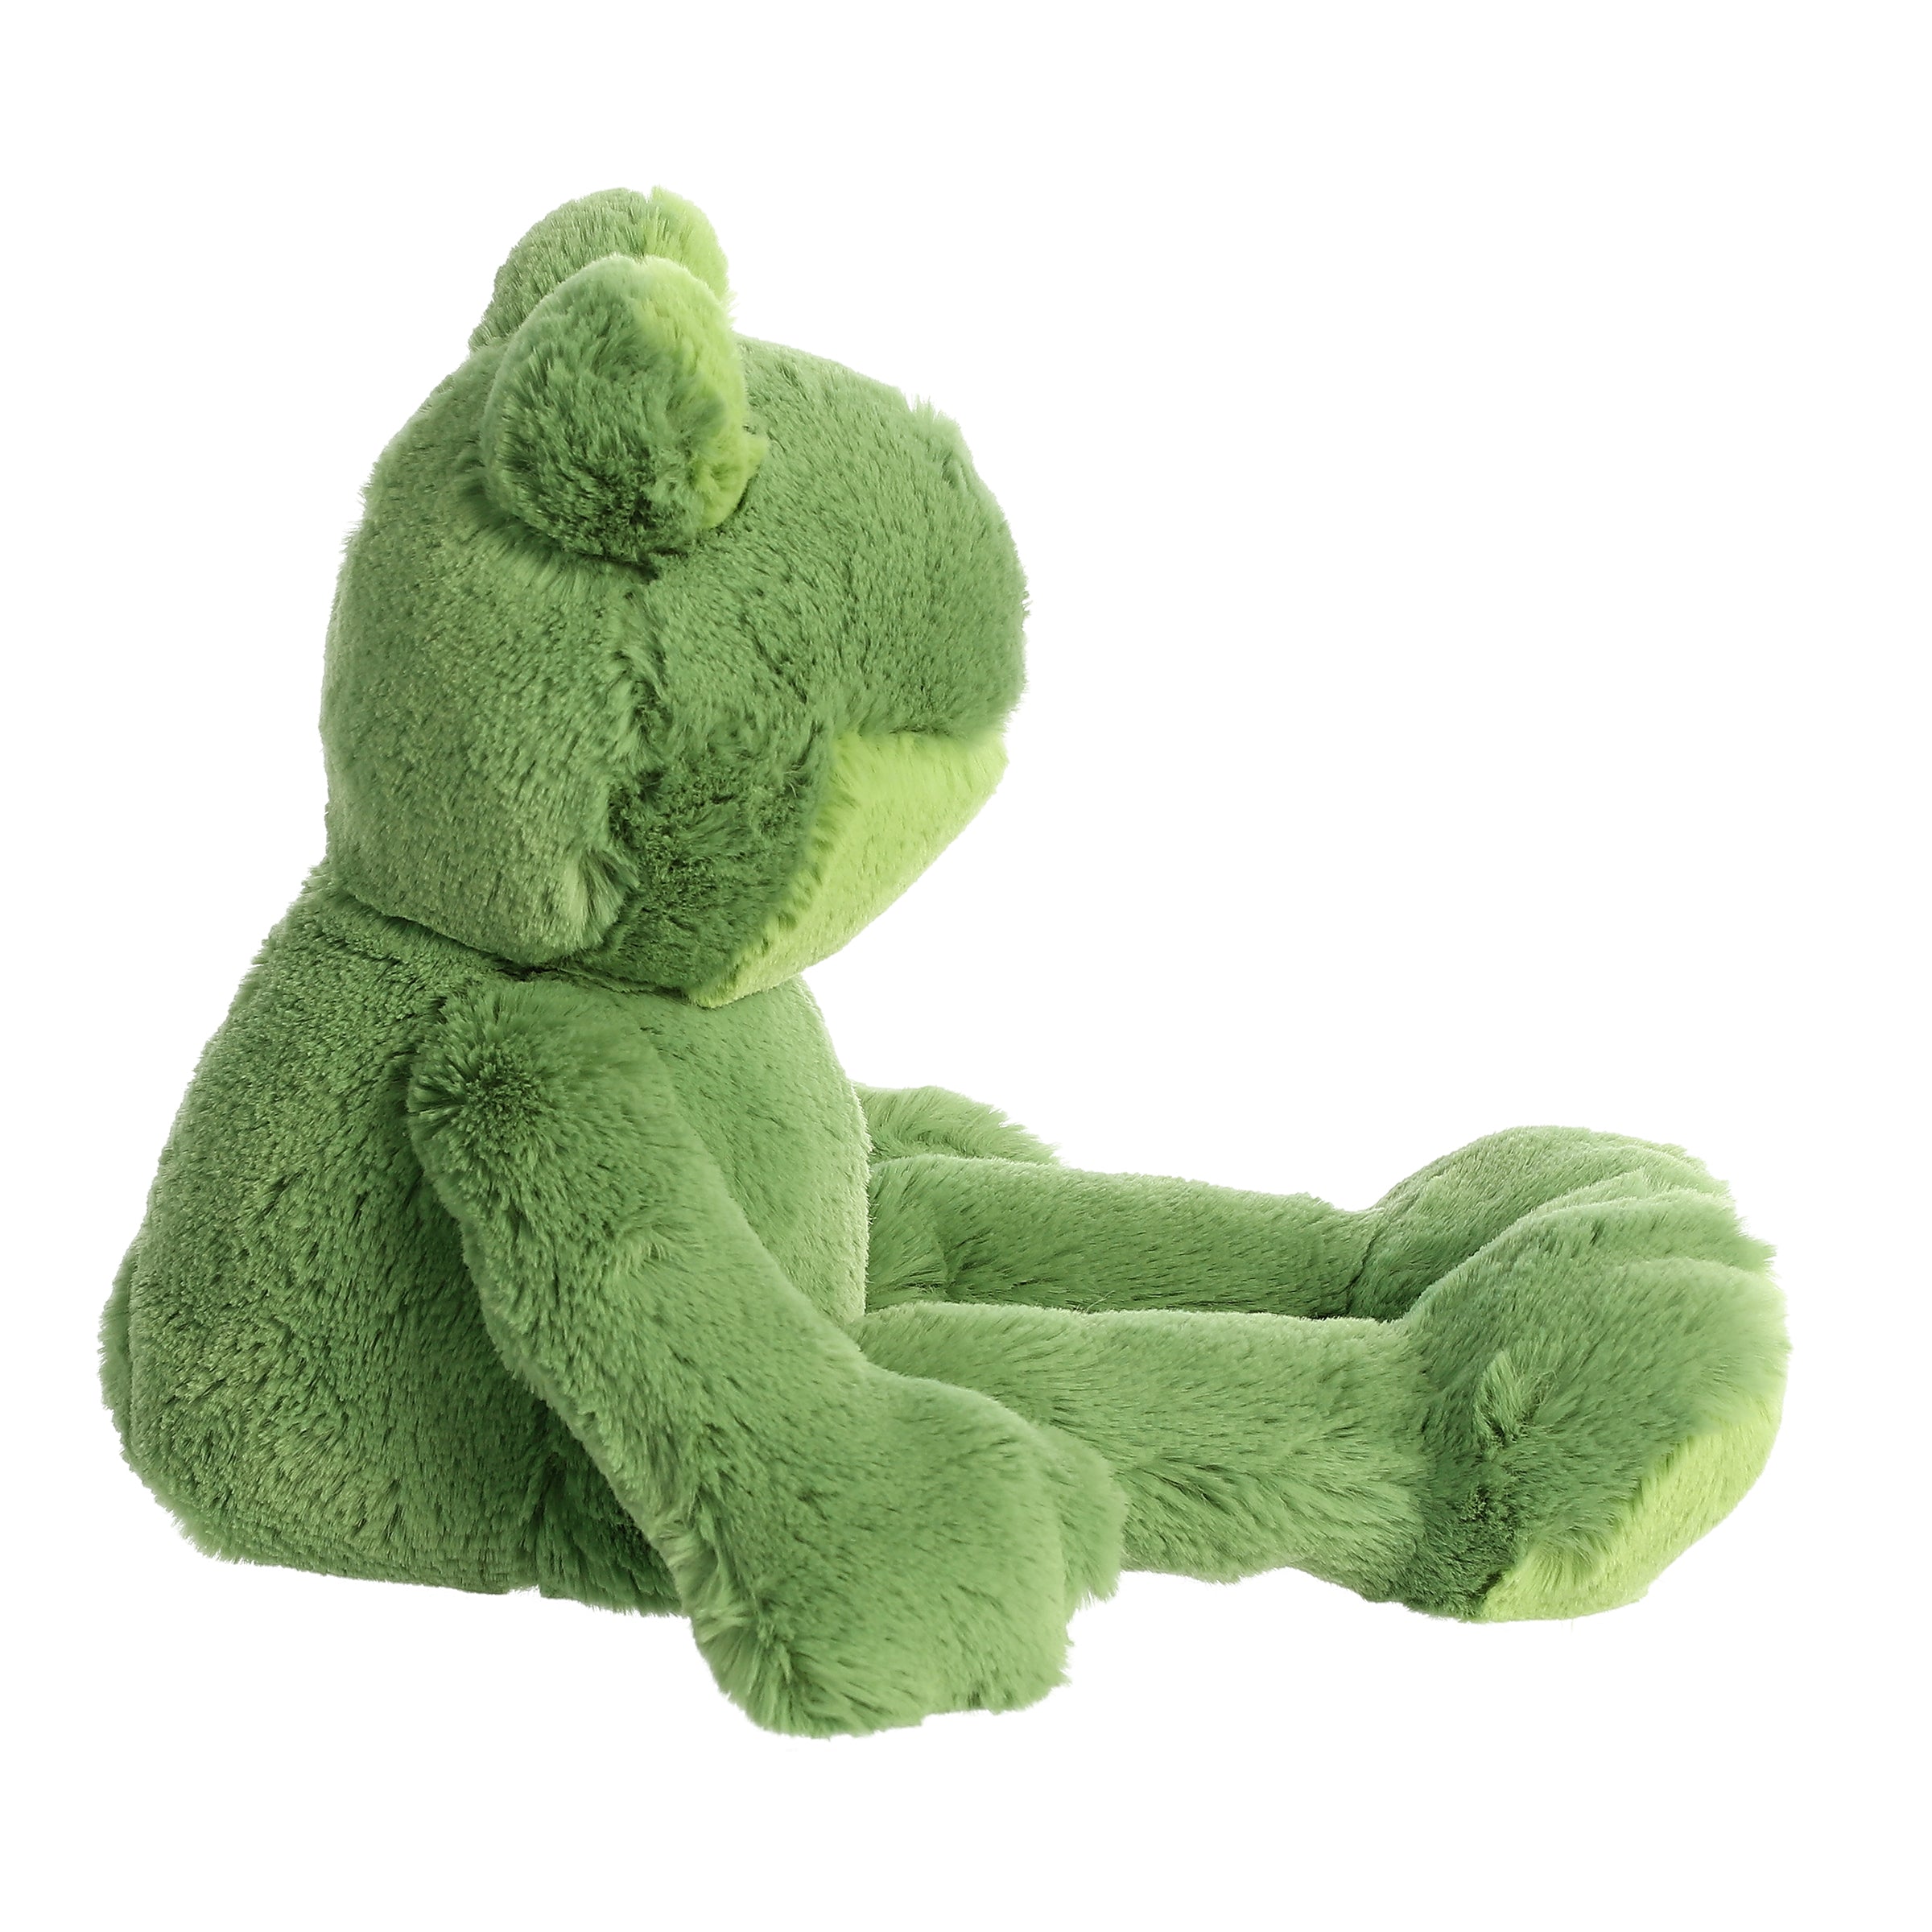 FROG Stuffed Animal, 16 Plushie, Make Your Own Stuffie, Soft and